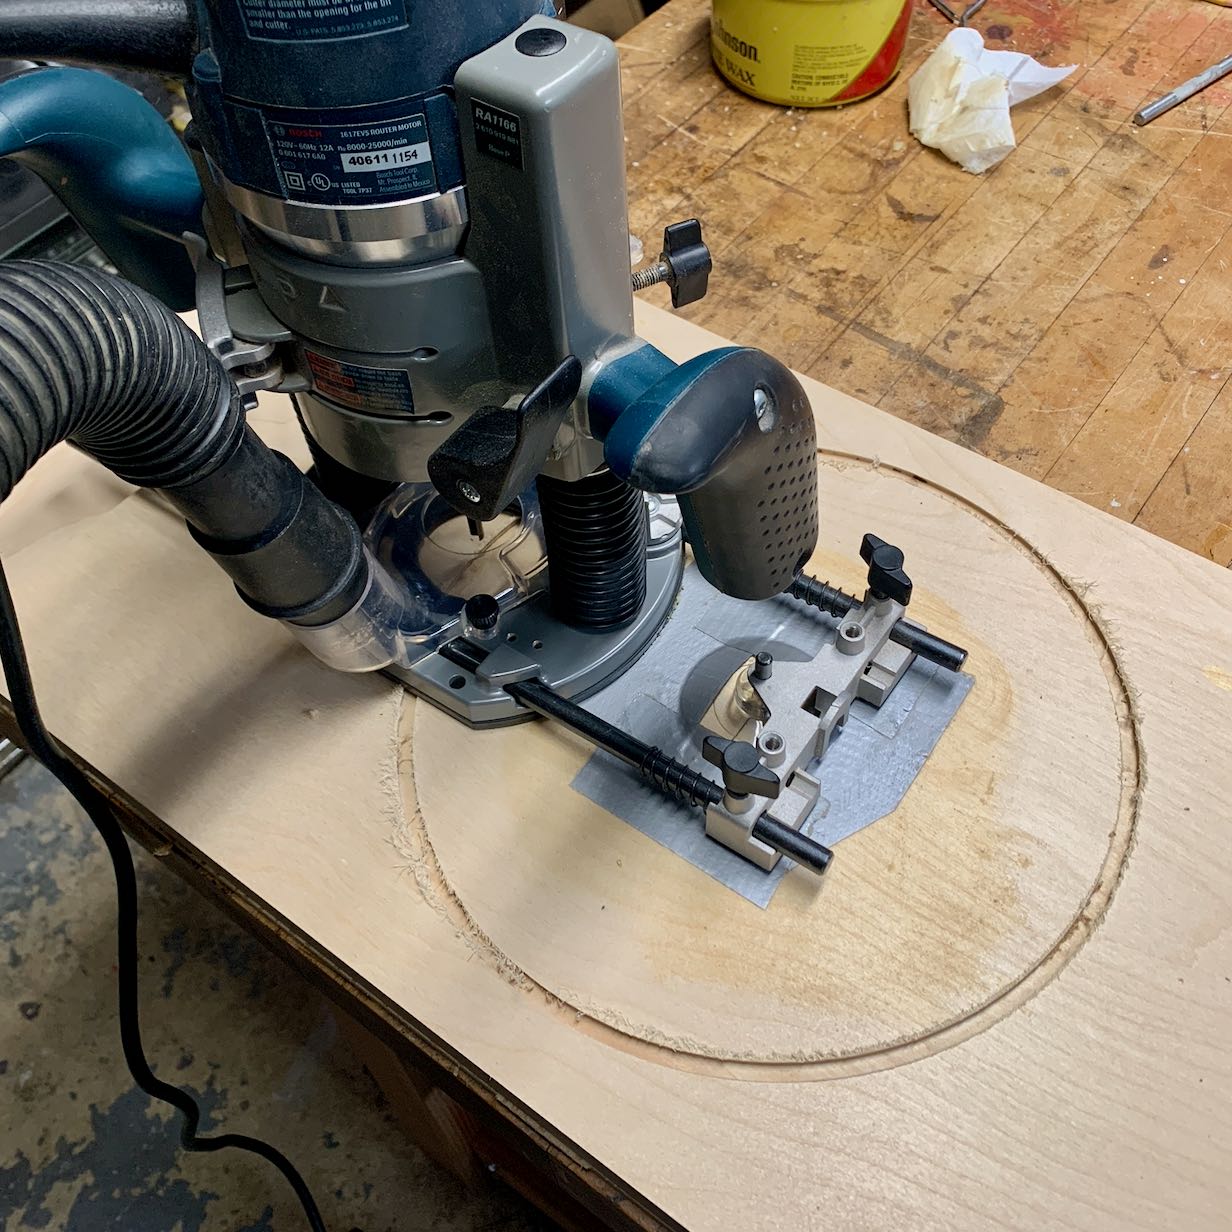 Build process photo of a router cutting a circle for the speaker baffle